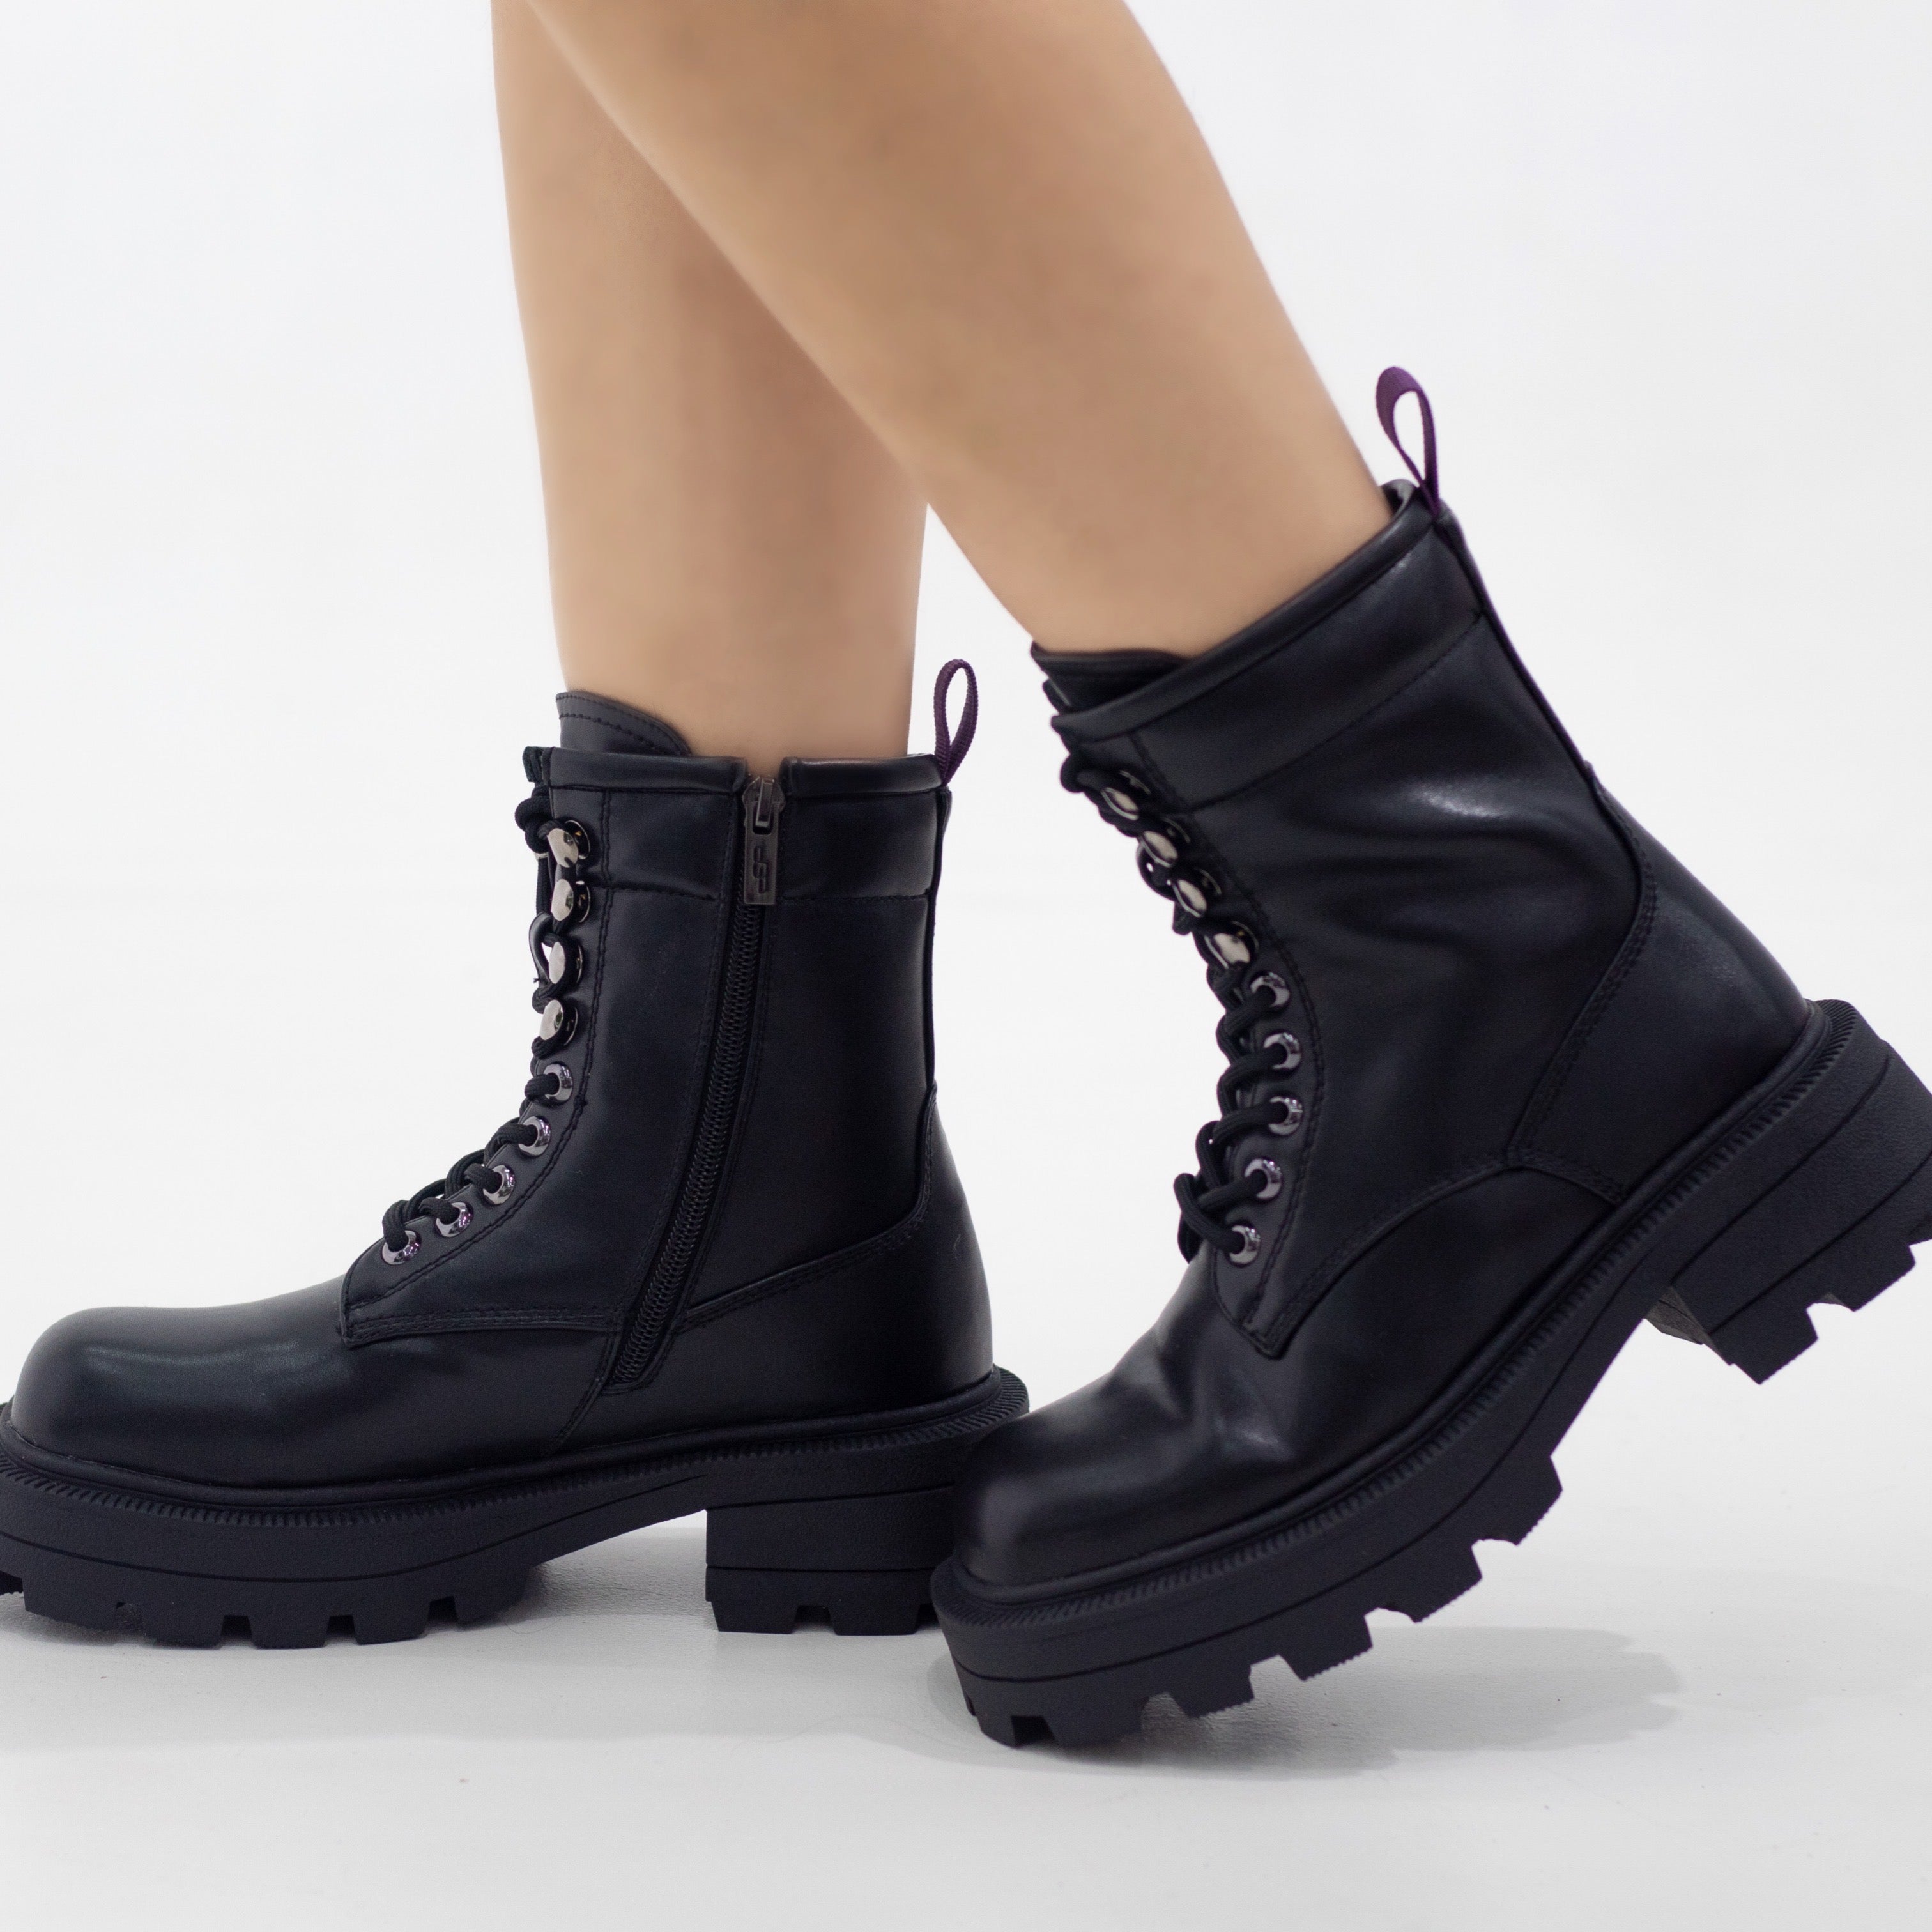 Black chunky belt laces ankle boot black cotia